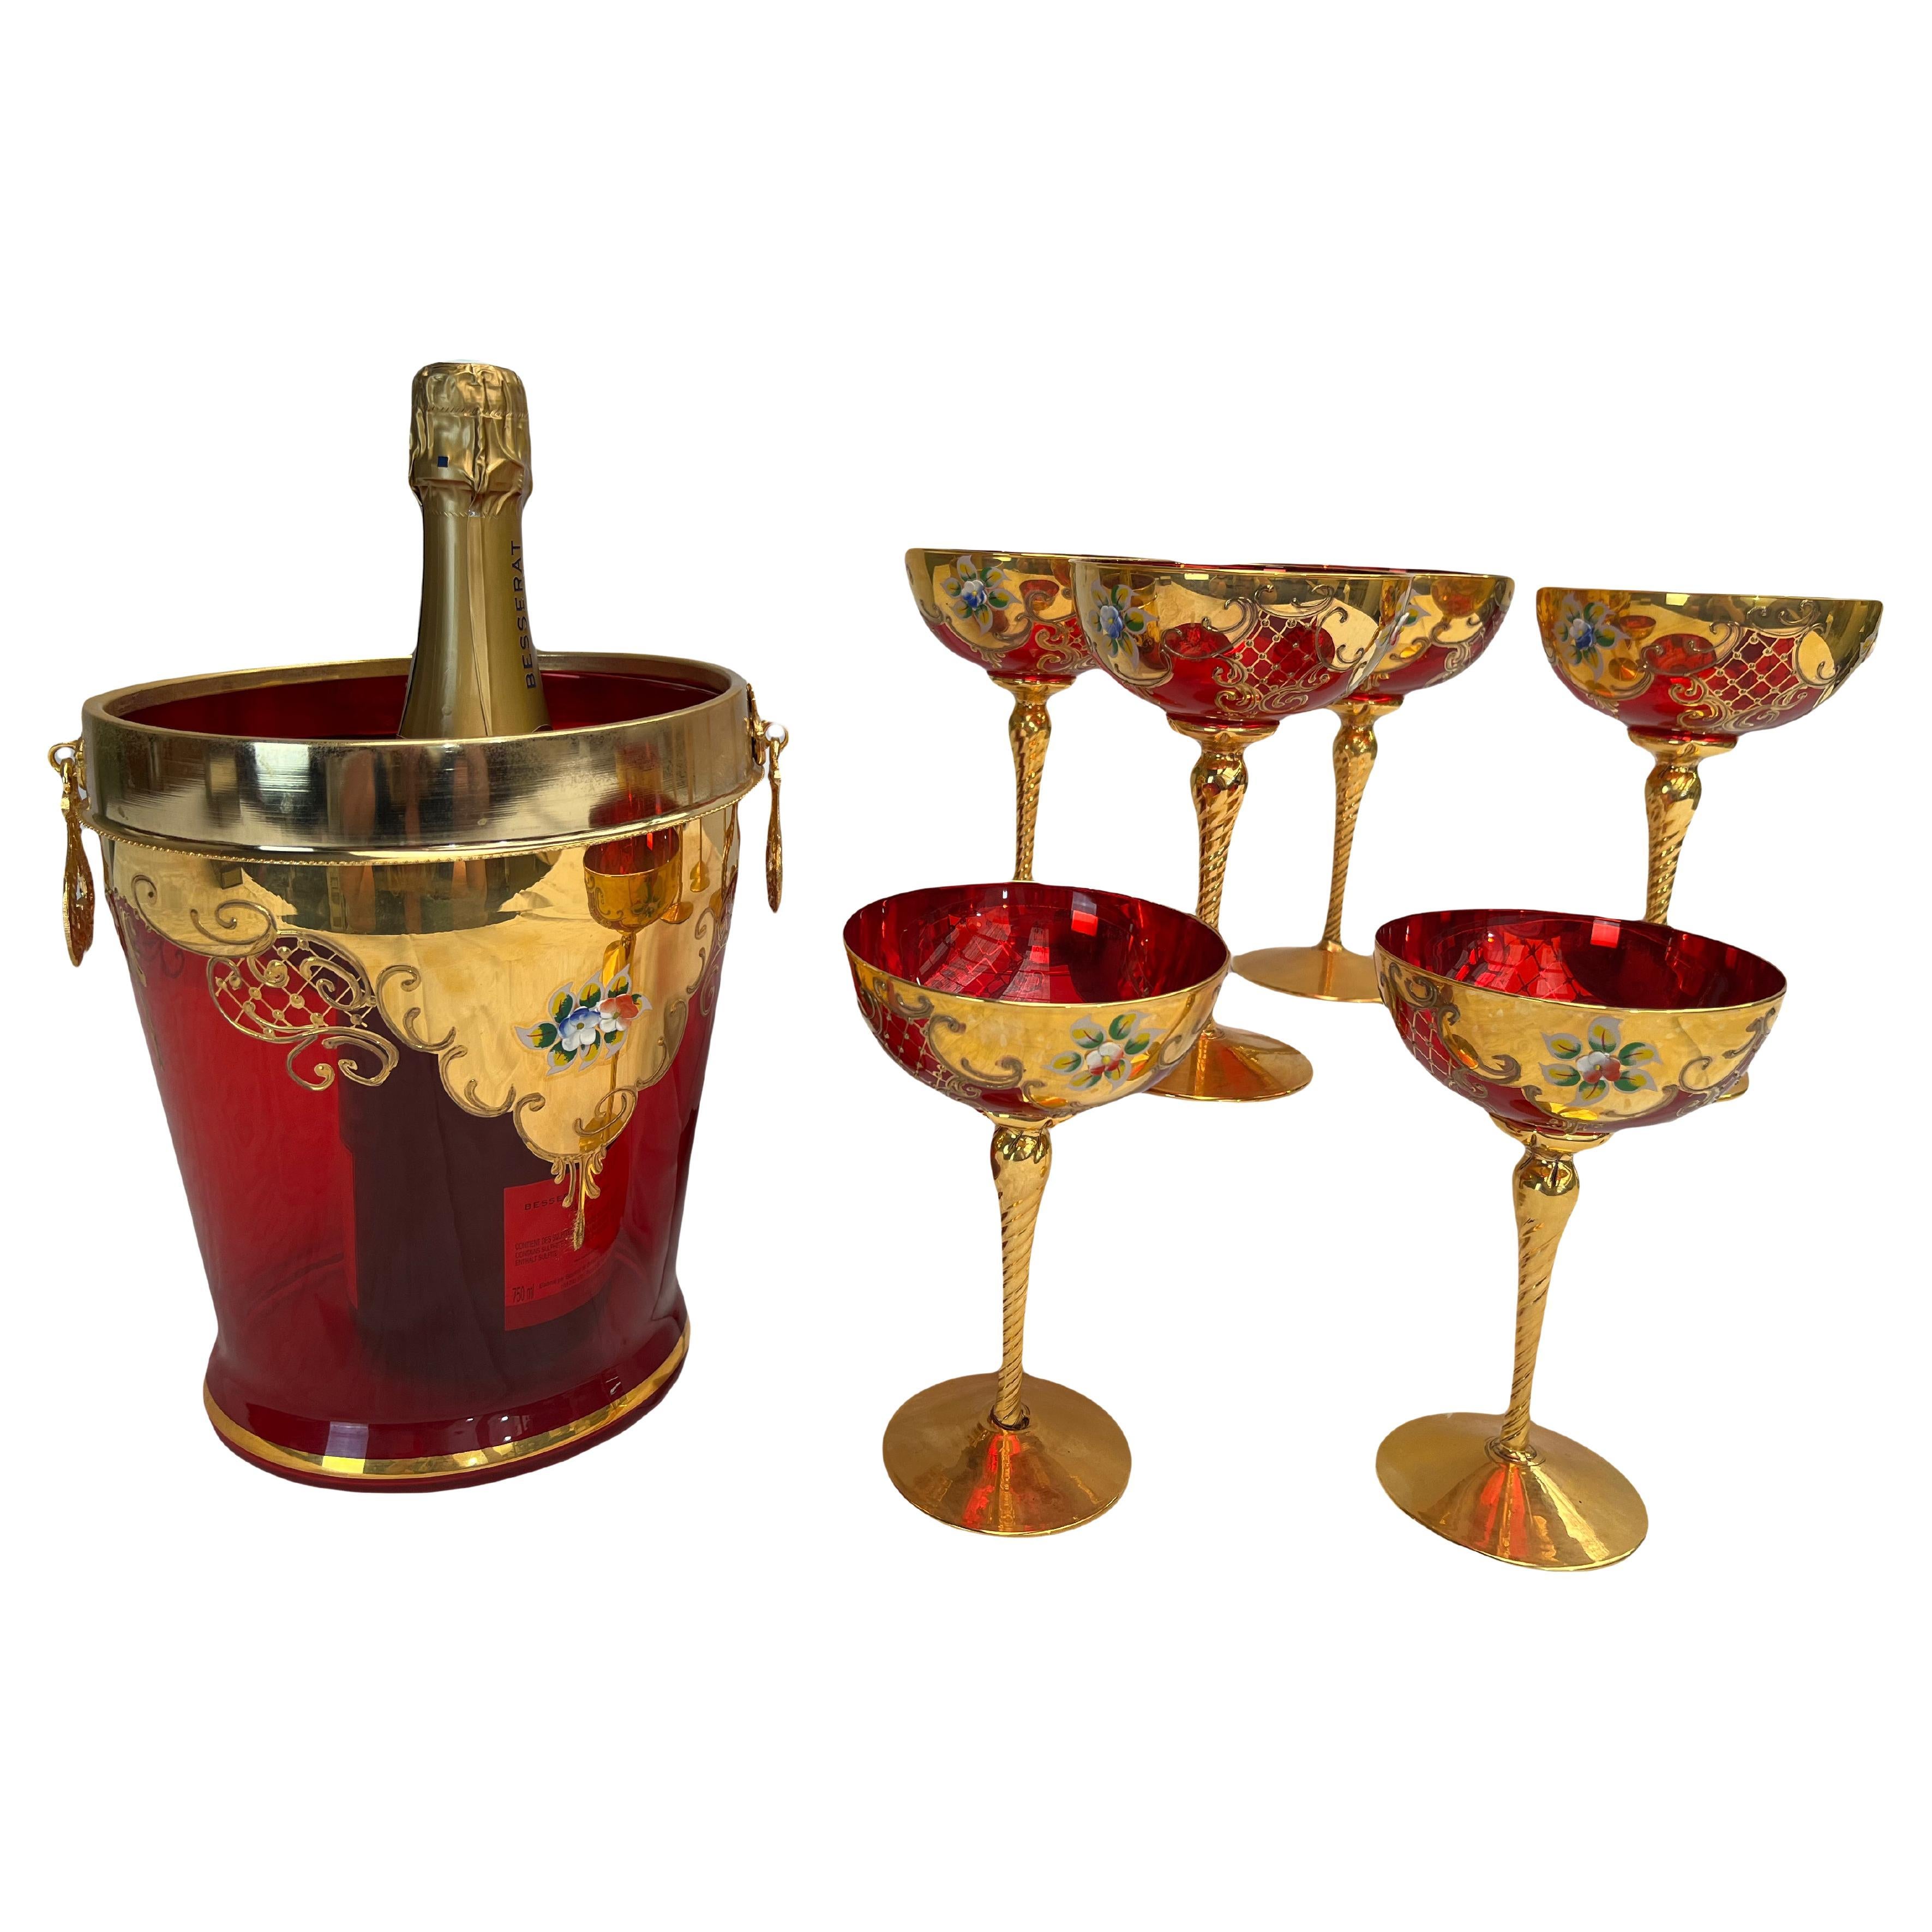 Here is a lovely champagne service composed of 6 red enameled glass flutes, accompanied by their matching champagne bucket. The glass of these flutes has a rich red hue, and their twisted stems are delicately gilded, creating an elegant contrast.